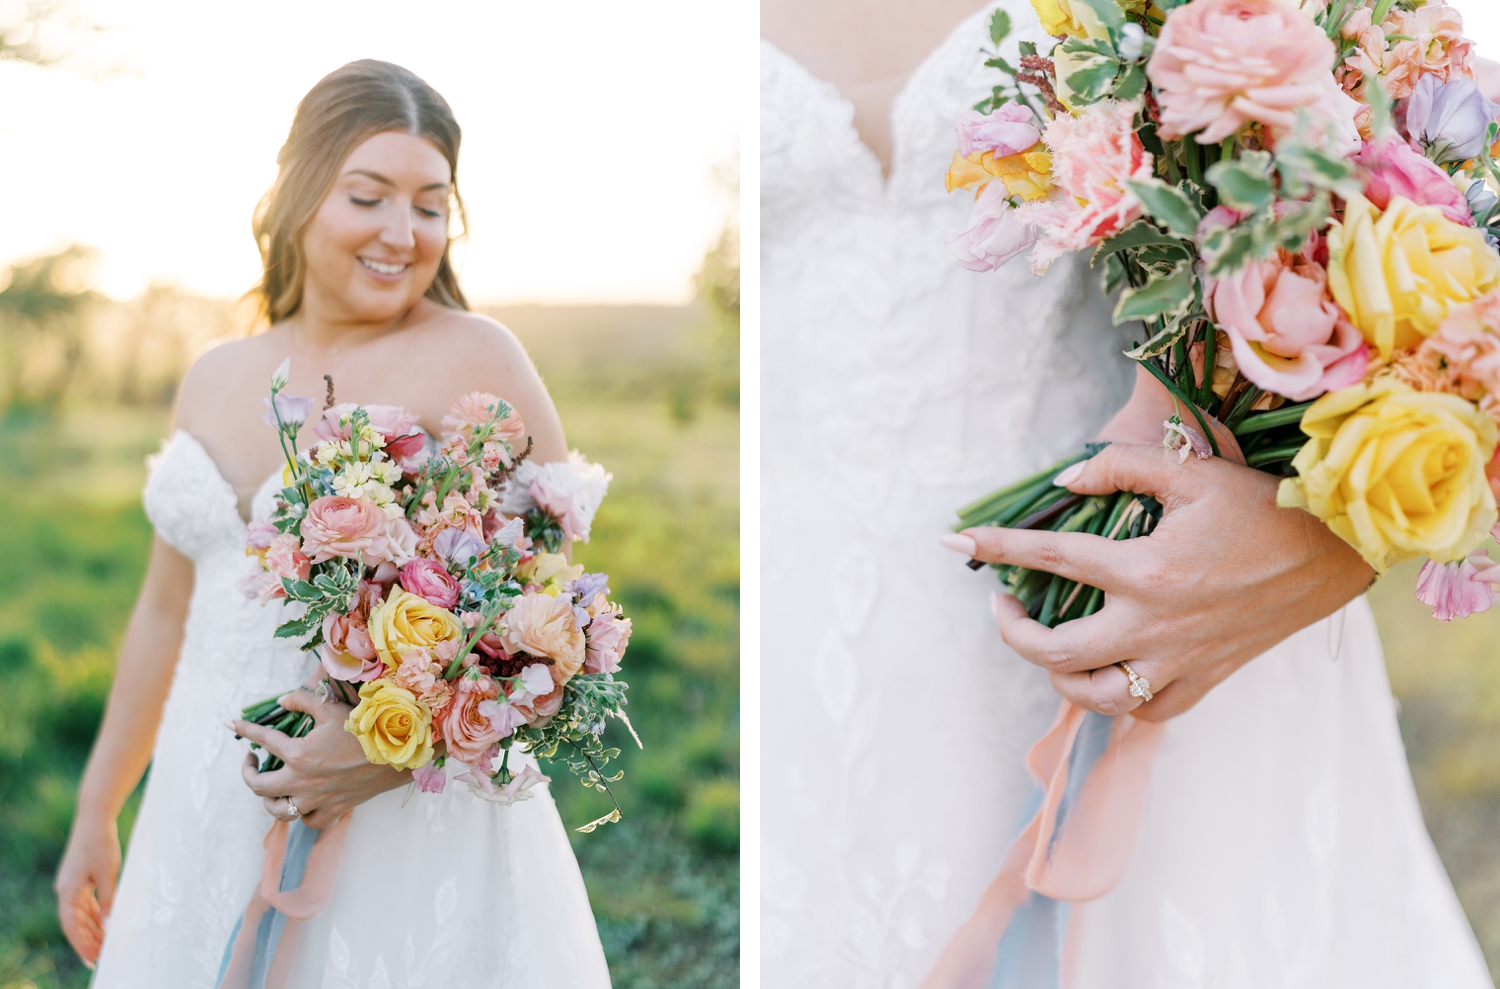 Bright and colorful wedding day at Mae's Ridge in Austin, Texas. Colorful pink and yellow florals, mismatched bridesmaid dresses and all of the little details make this intimate wedding day perfect! | Reiley + Rose | Central Texas Floral Designer